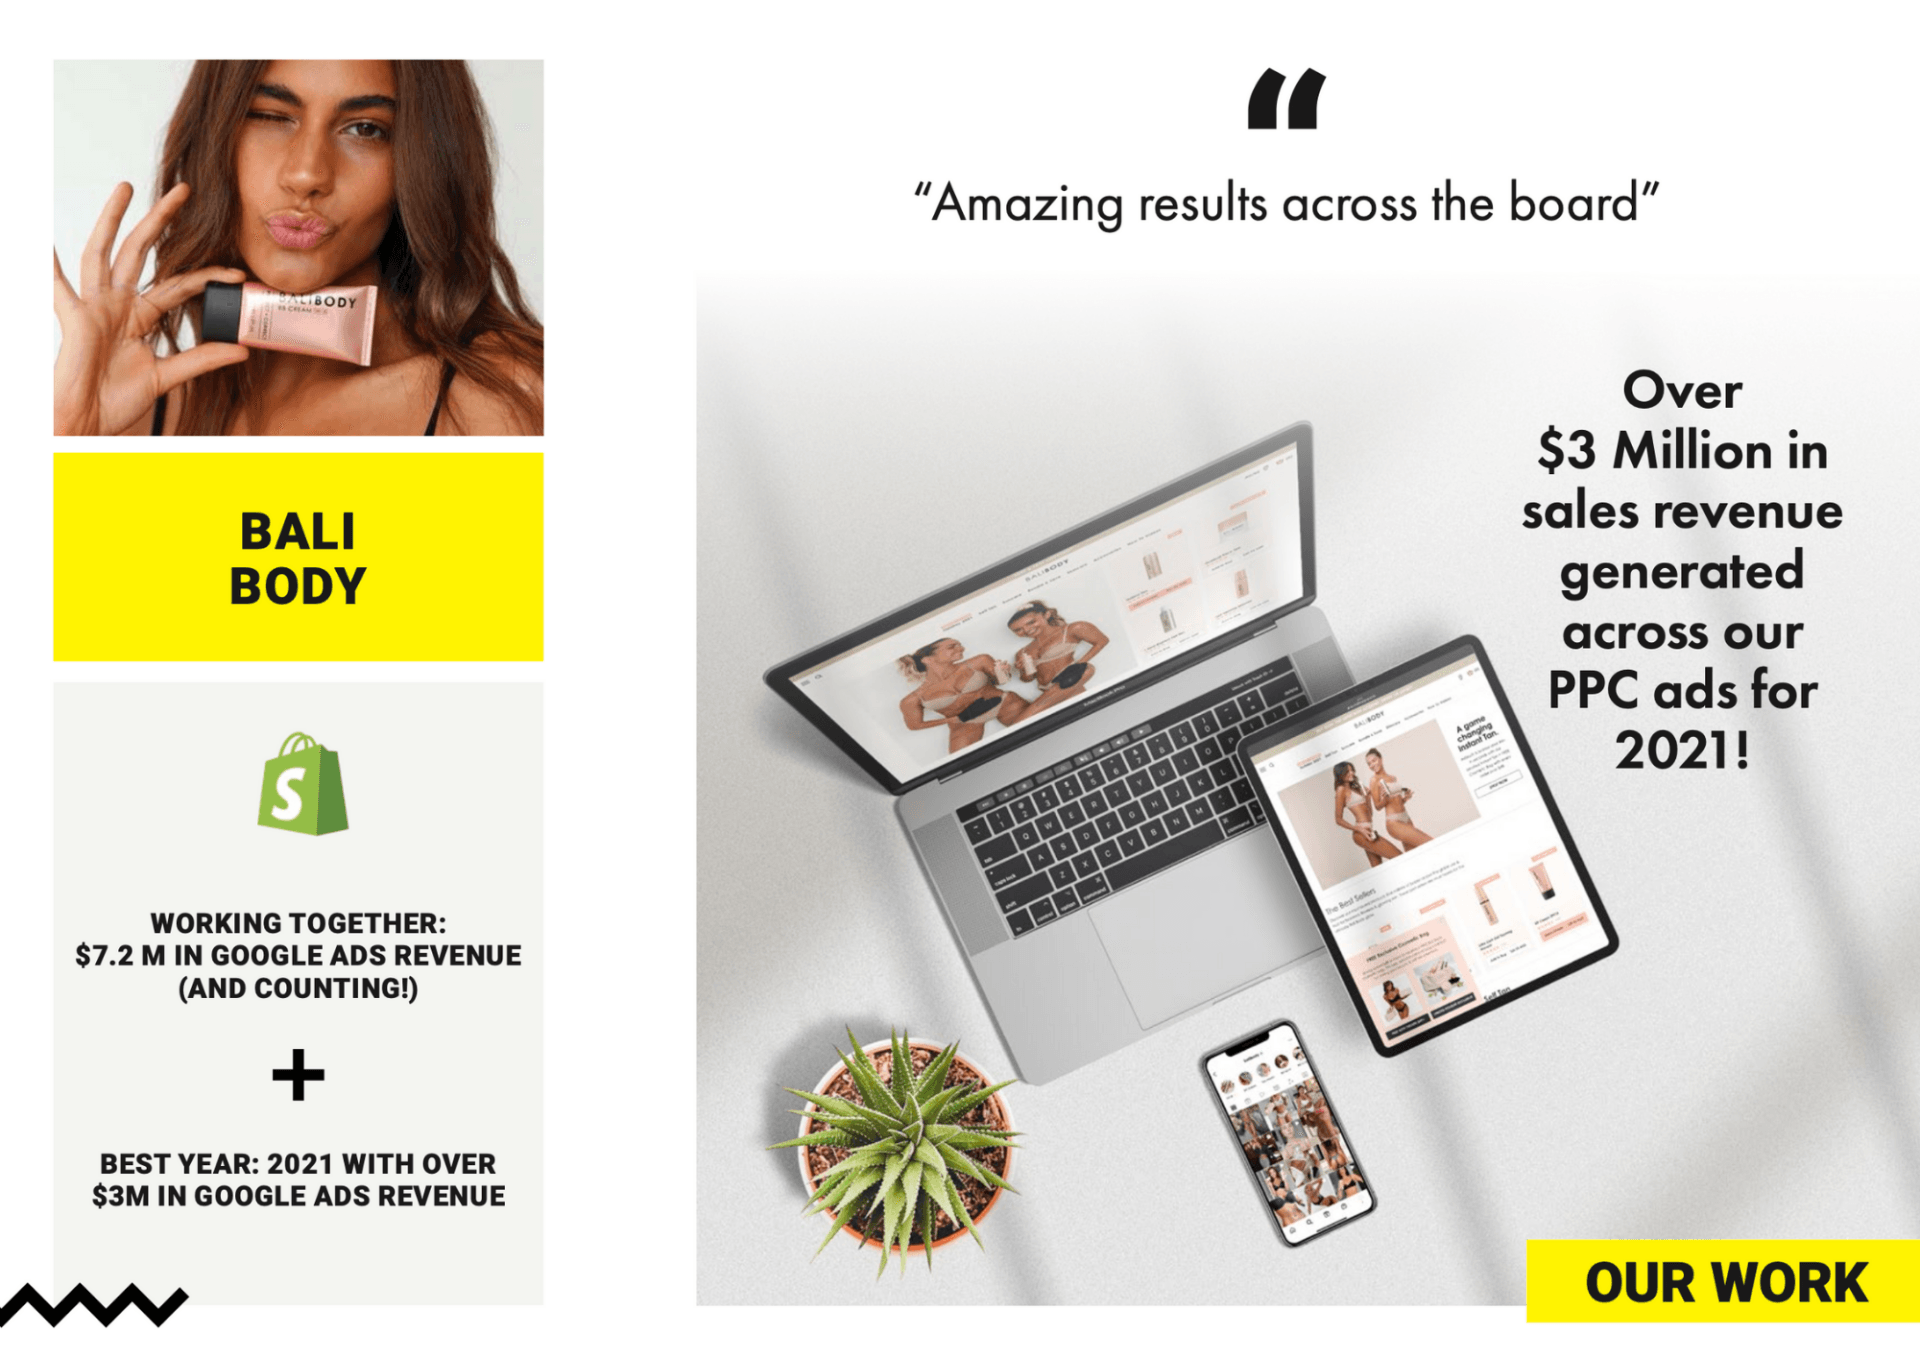 Showcasing Apex Ad Agency's Outstanding Results: Over $3 Million In Sales Revenue Achieved Through 2021 PPC Ads - A Testament To Our Successful Partnership With Bali Body.